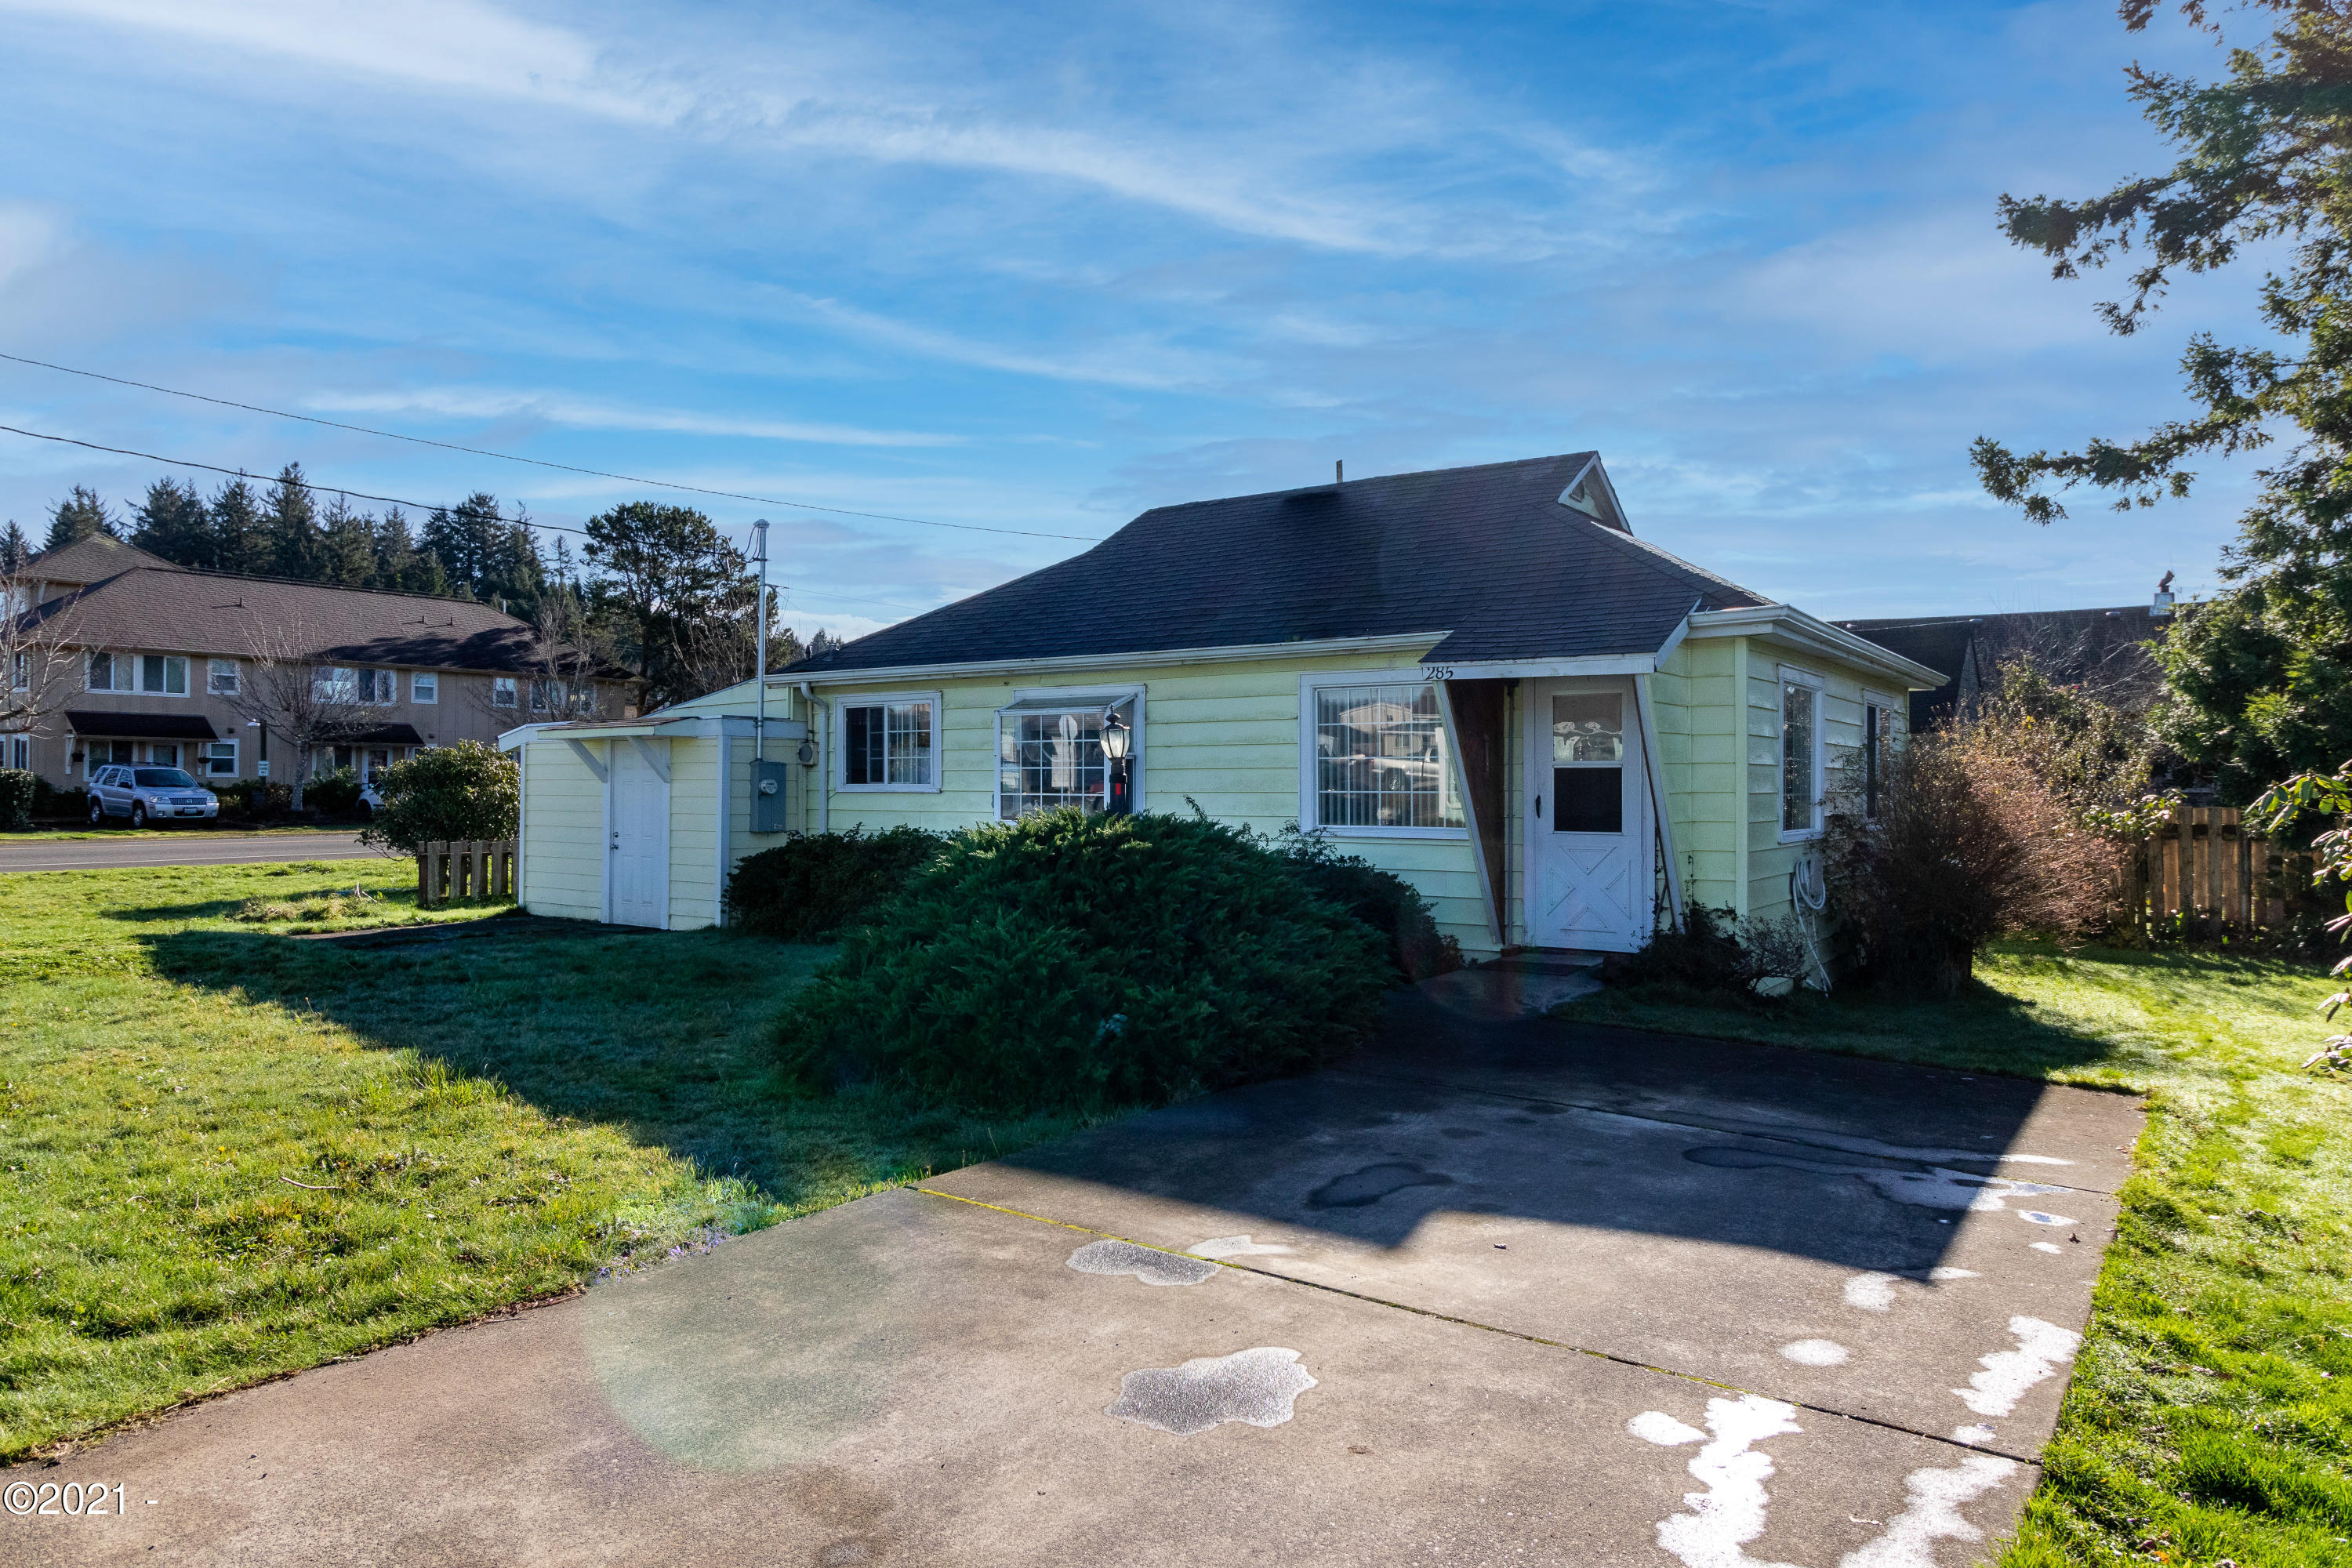 285 NE Grant St Depoe Bay, Gleneden Beach, Lincoln City, Newport, Otis, Rose Lodge, Seal Rock, Waldport, Yachats, To Home Listings - Amy Plechaty, Emerald Coast Realty Real Estate, homes for sale, property for sale